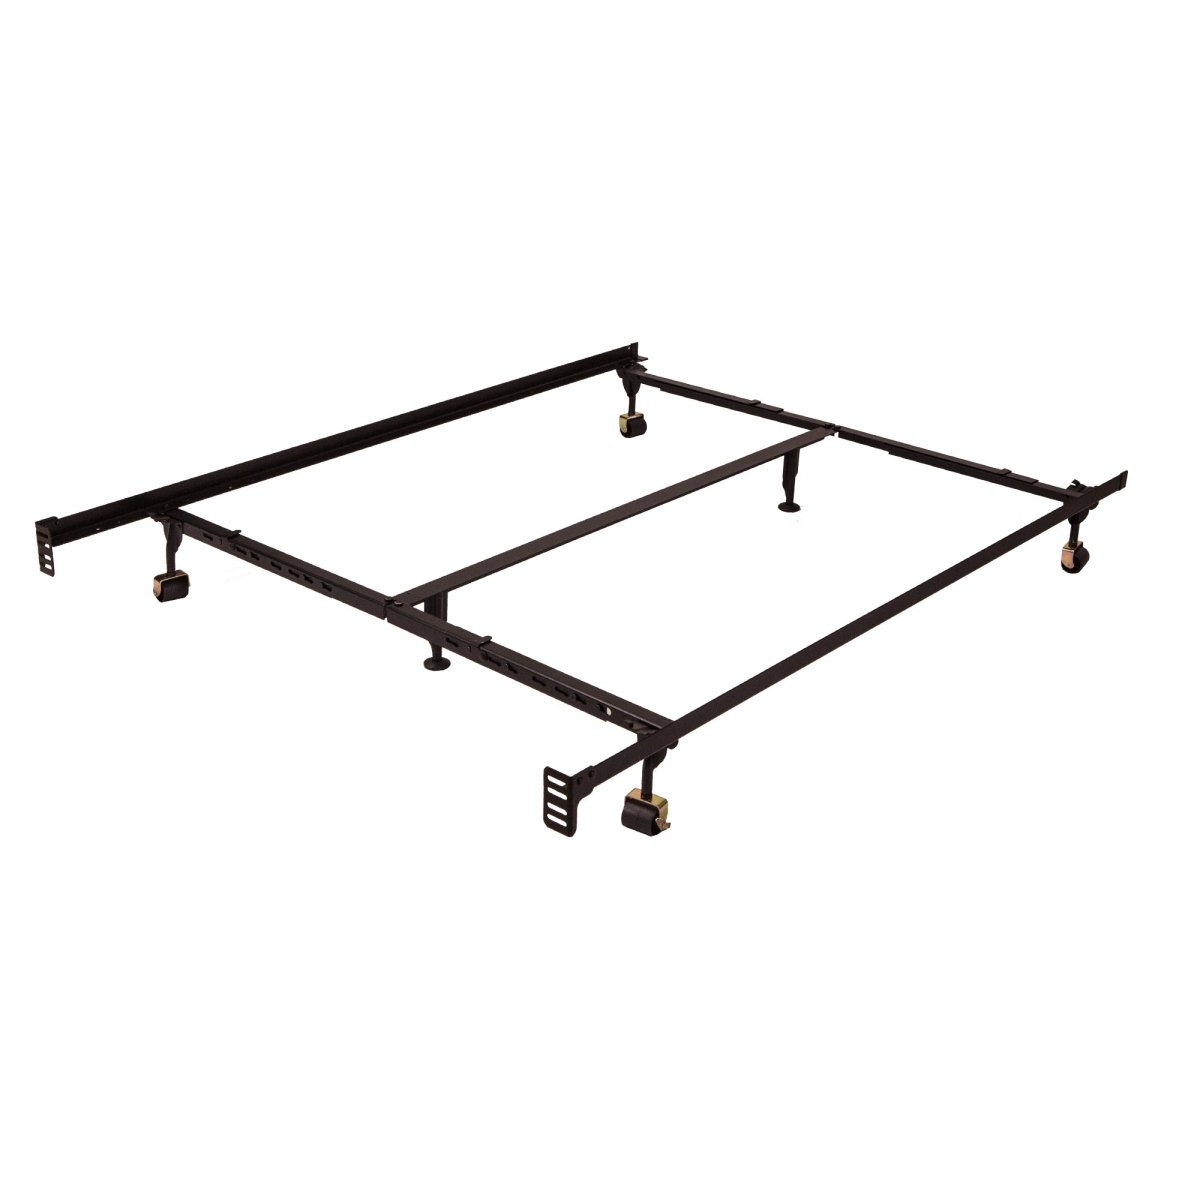 Premium Universal Lev-R-Lock Bed Frame- Fits Standard Twin, Full, Queen, King, California King Sizes - Alpine Outlets